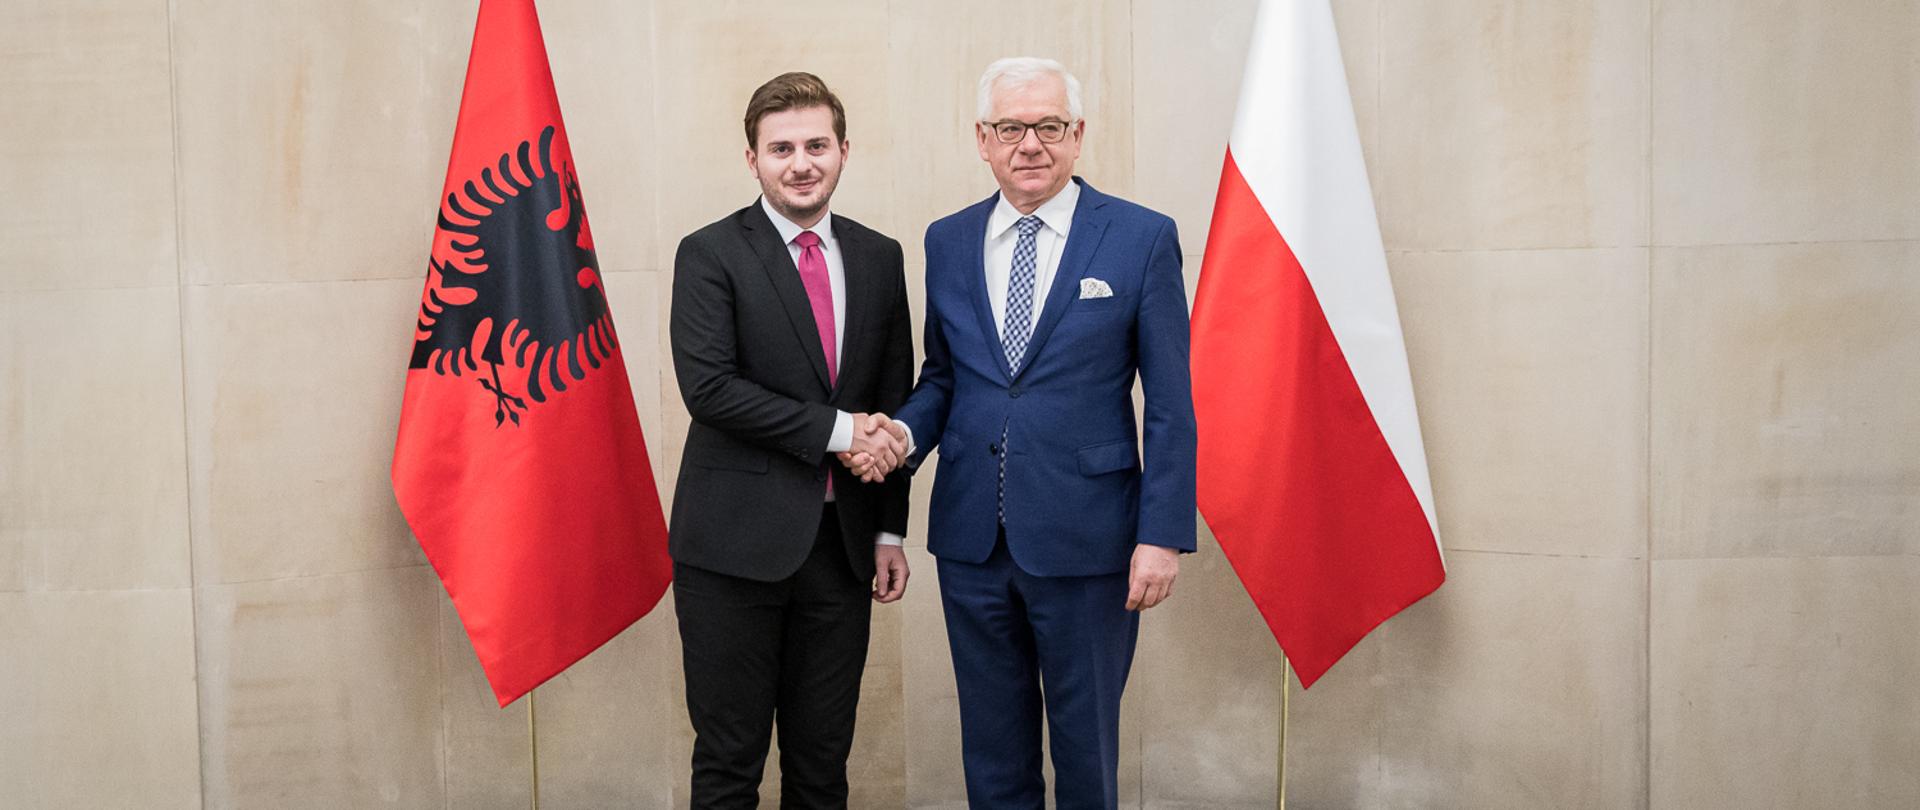 Albanian Minister for Europe and Foreign Affairs visits Warsaw